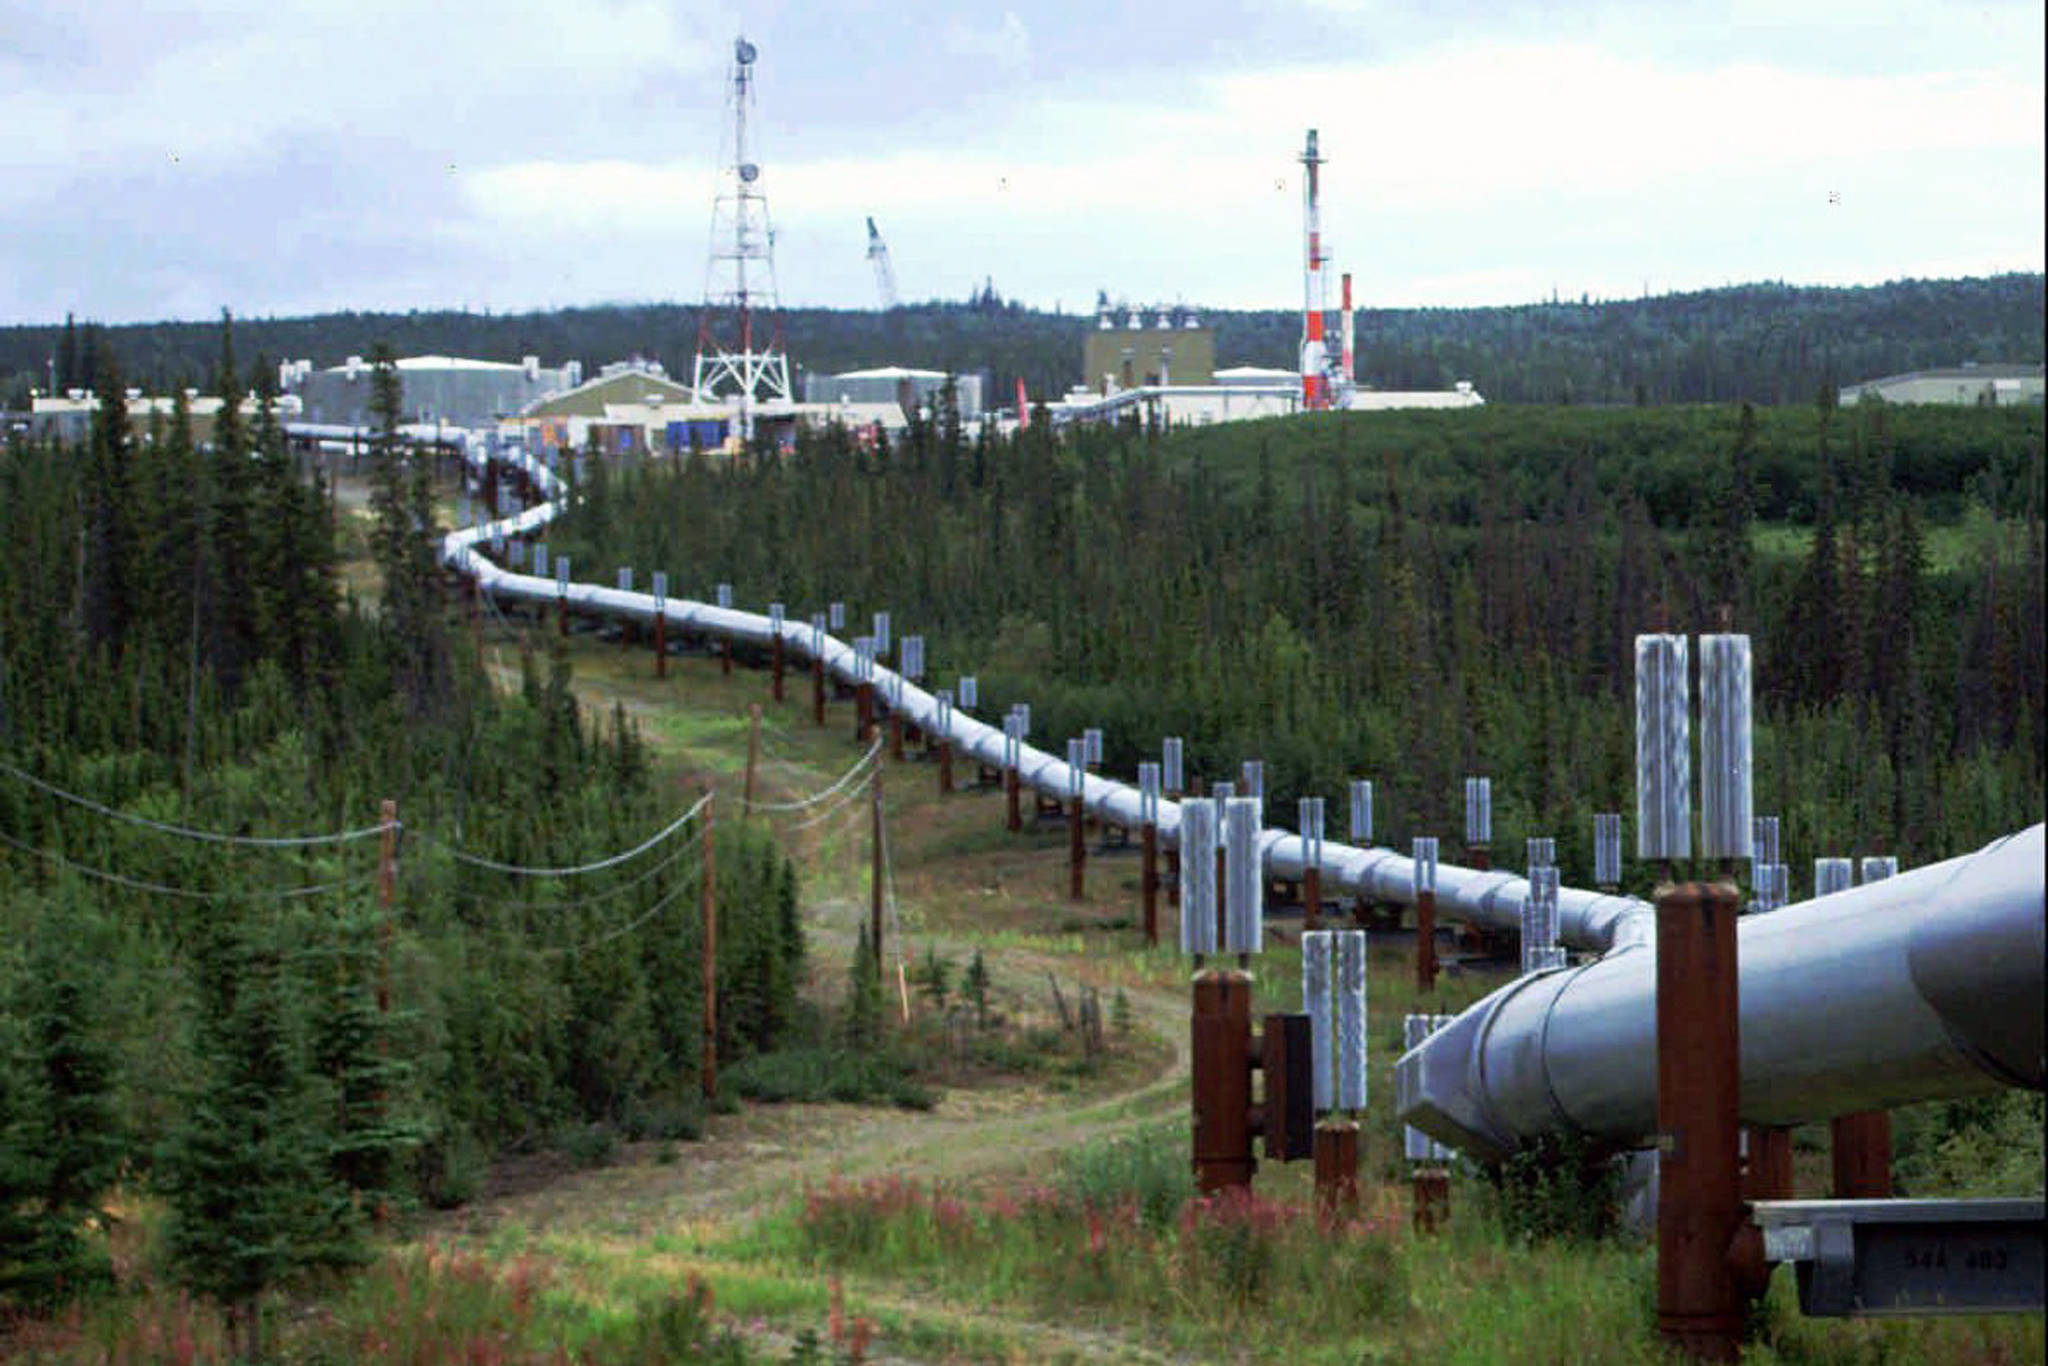 This undated file photo shows the Trans-Alaska pipeline and pump station north of Fairbanks, Alaska. (AP Photo/Al Grillo, File)FILE - This undated file photo shows the Trans-Alaska pipeline and pump station north of Fairbanks, Alaska. The future of Alaska’s unique program of paying residents an annual check is in question, with oil prices low and an economy struggling during the coronavirus pandemic. (AP Photo/Al Grillo, File)